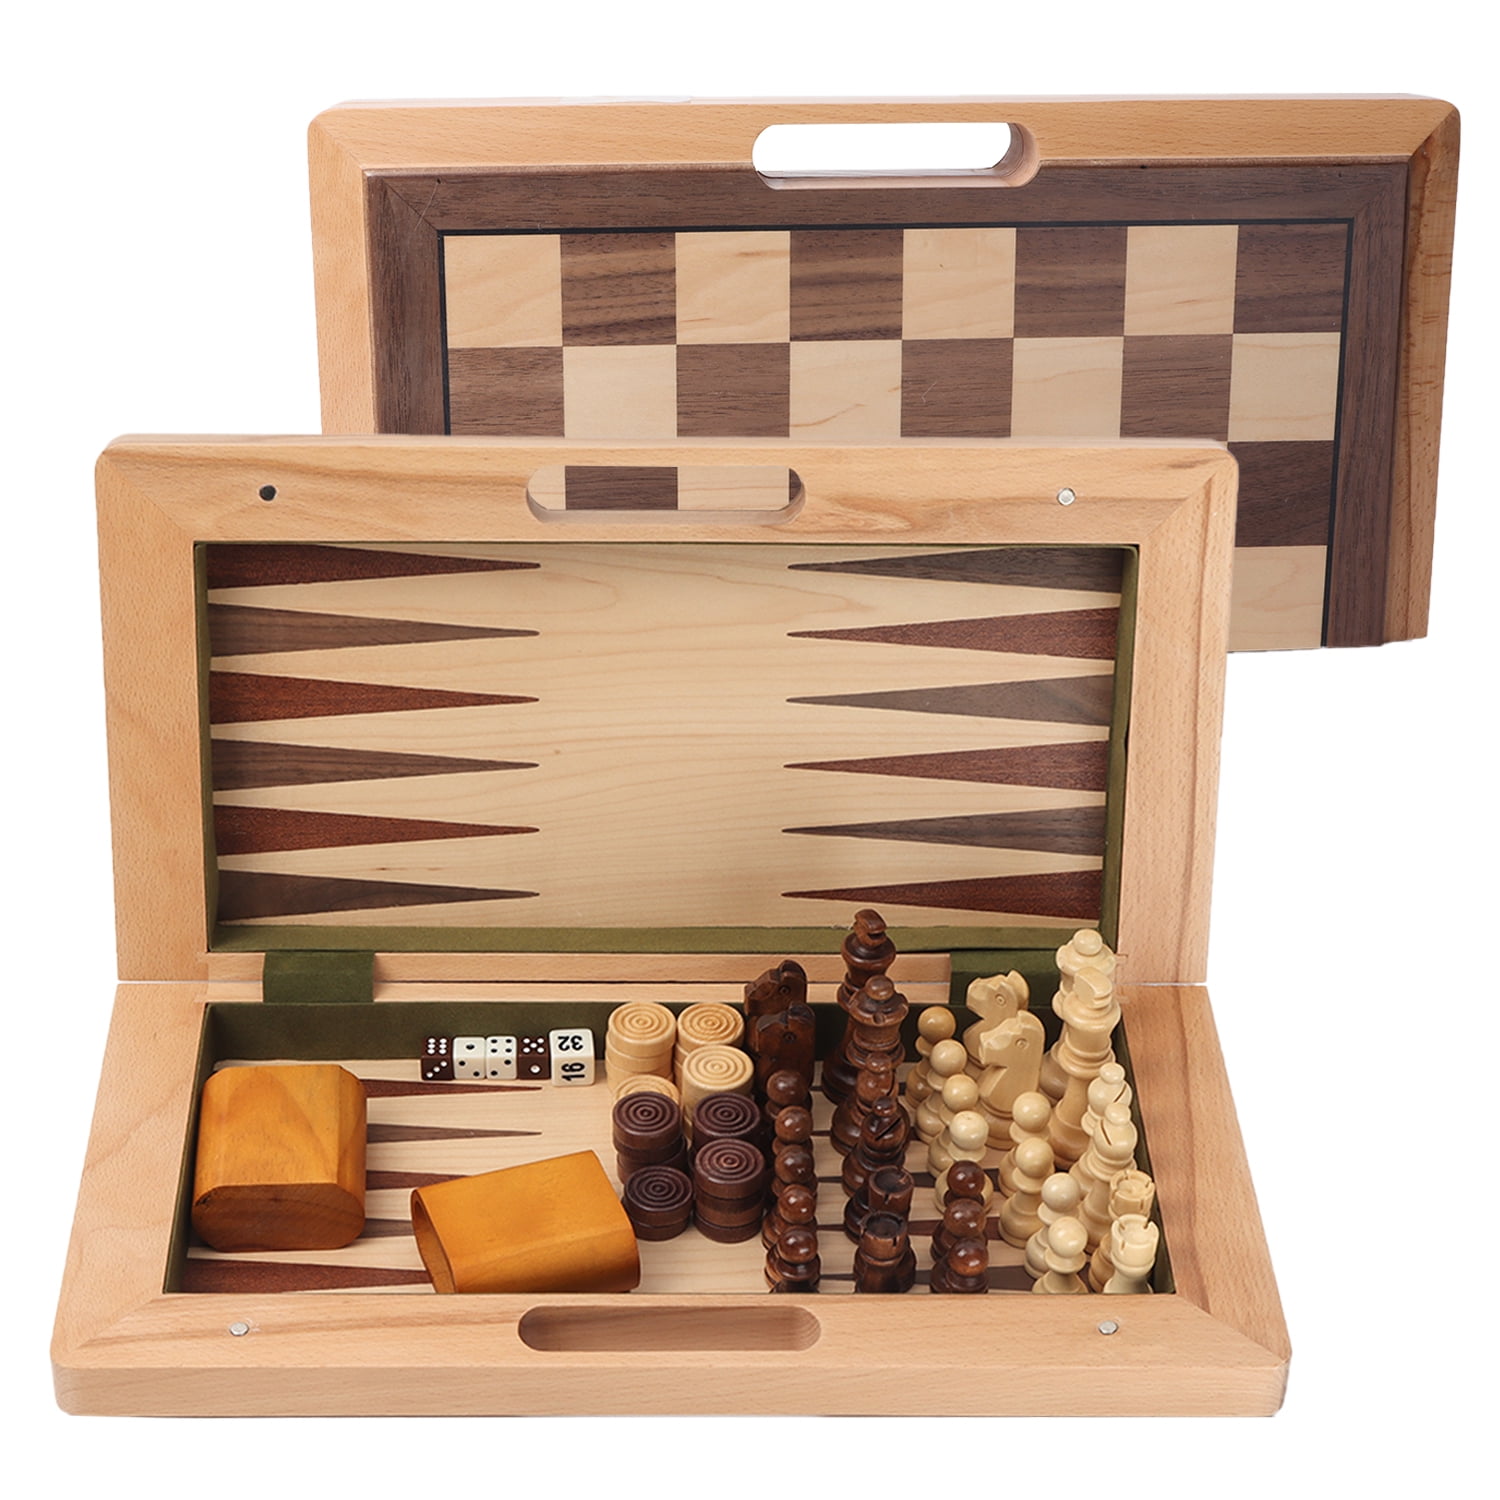 3 in 1 Portable Folding Standard Chess Set,Wooden Chess Board Game  Backgammon Draughts Club Camping Traveling Game Set 